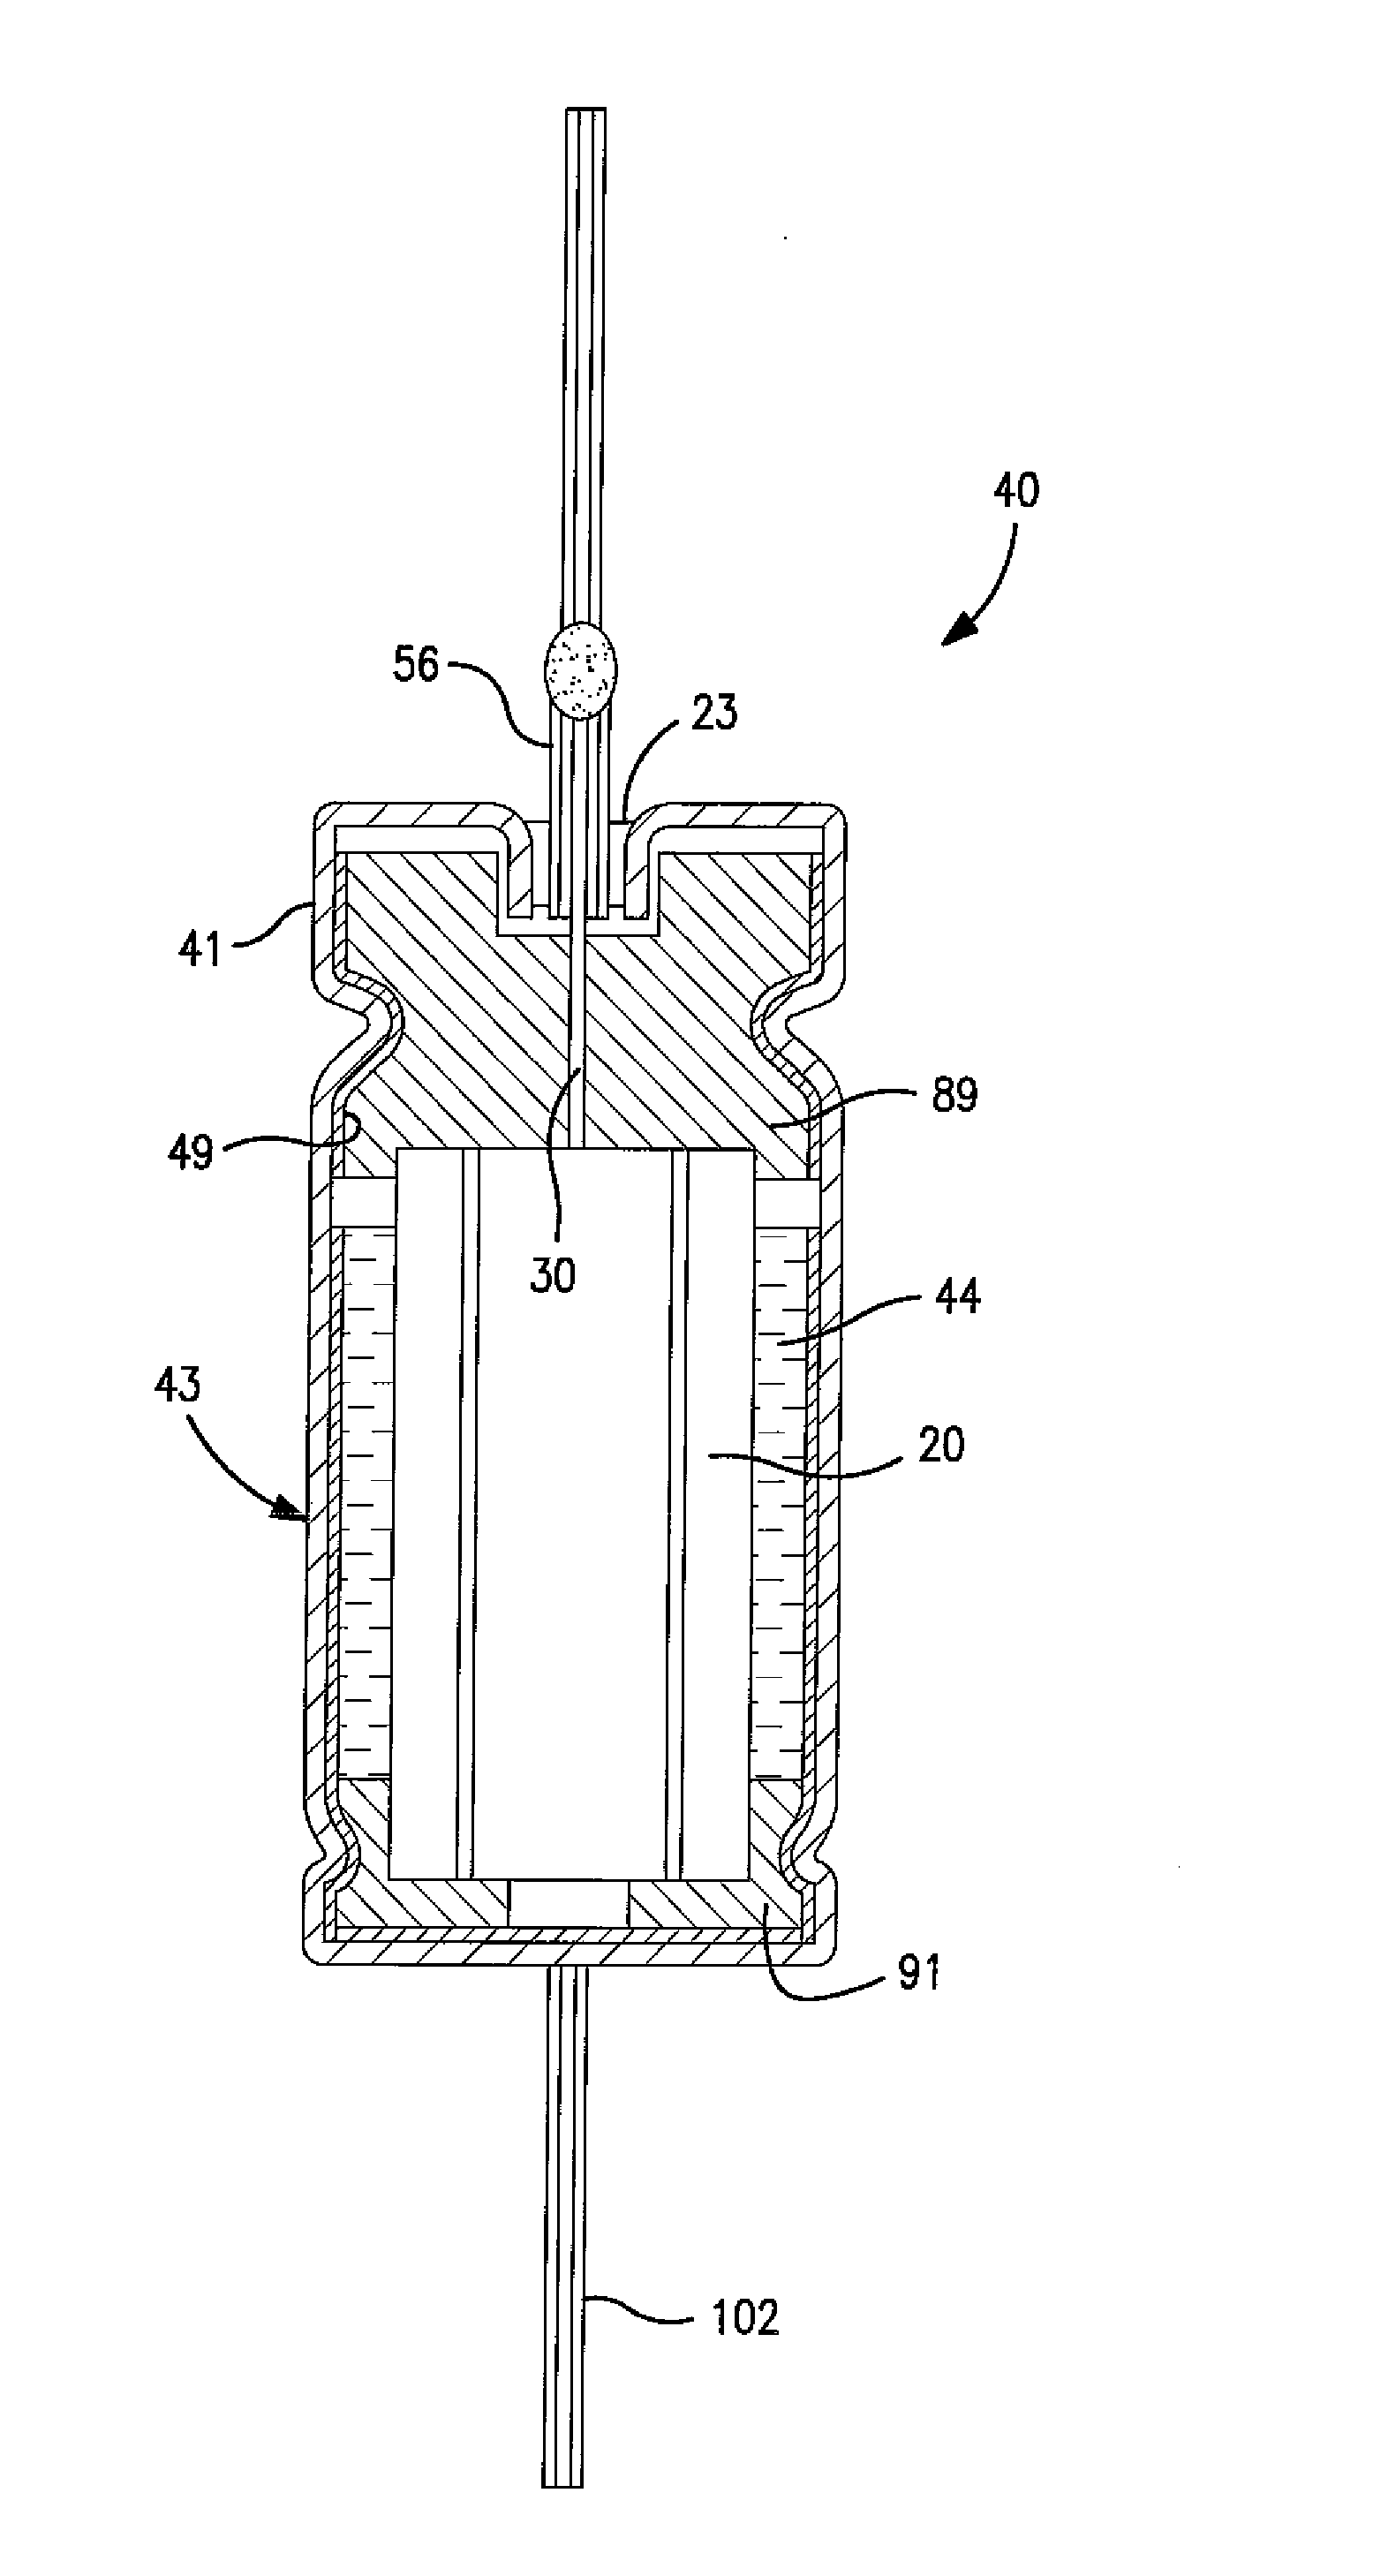 Wet Capacitor Cathode Containing a Conductive Copolymer